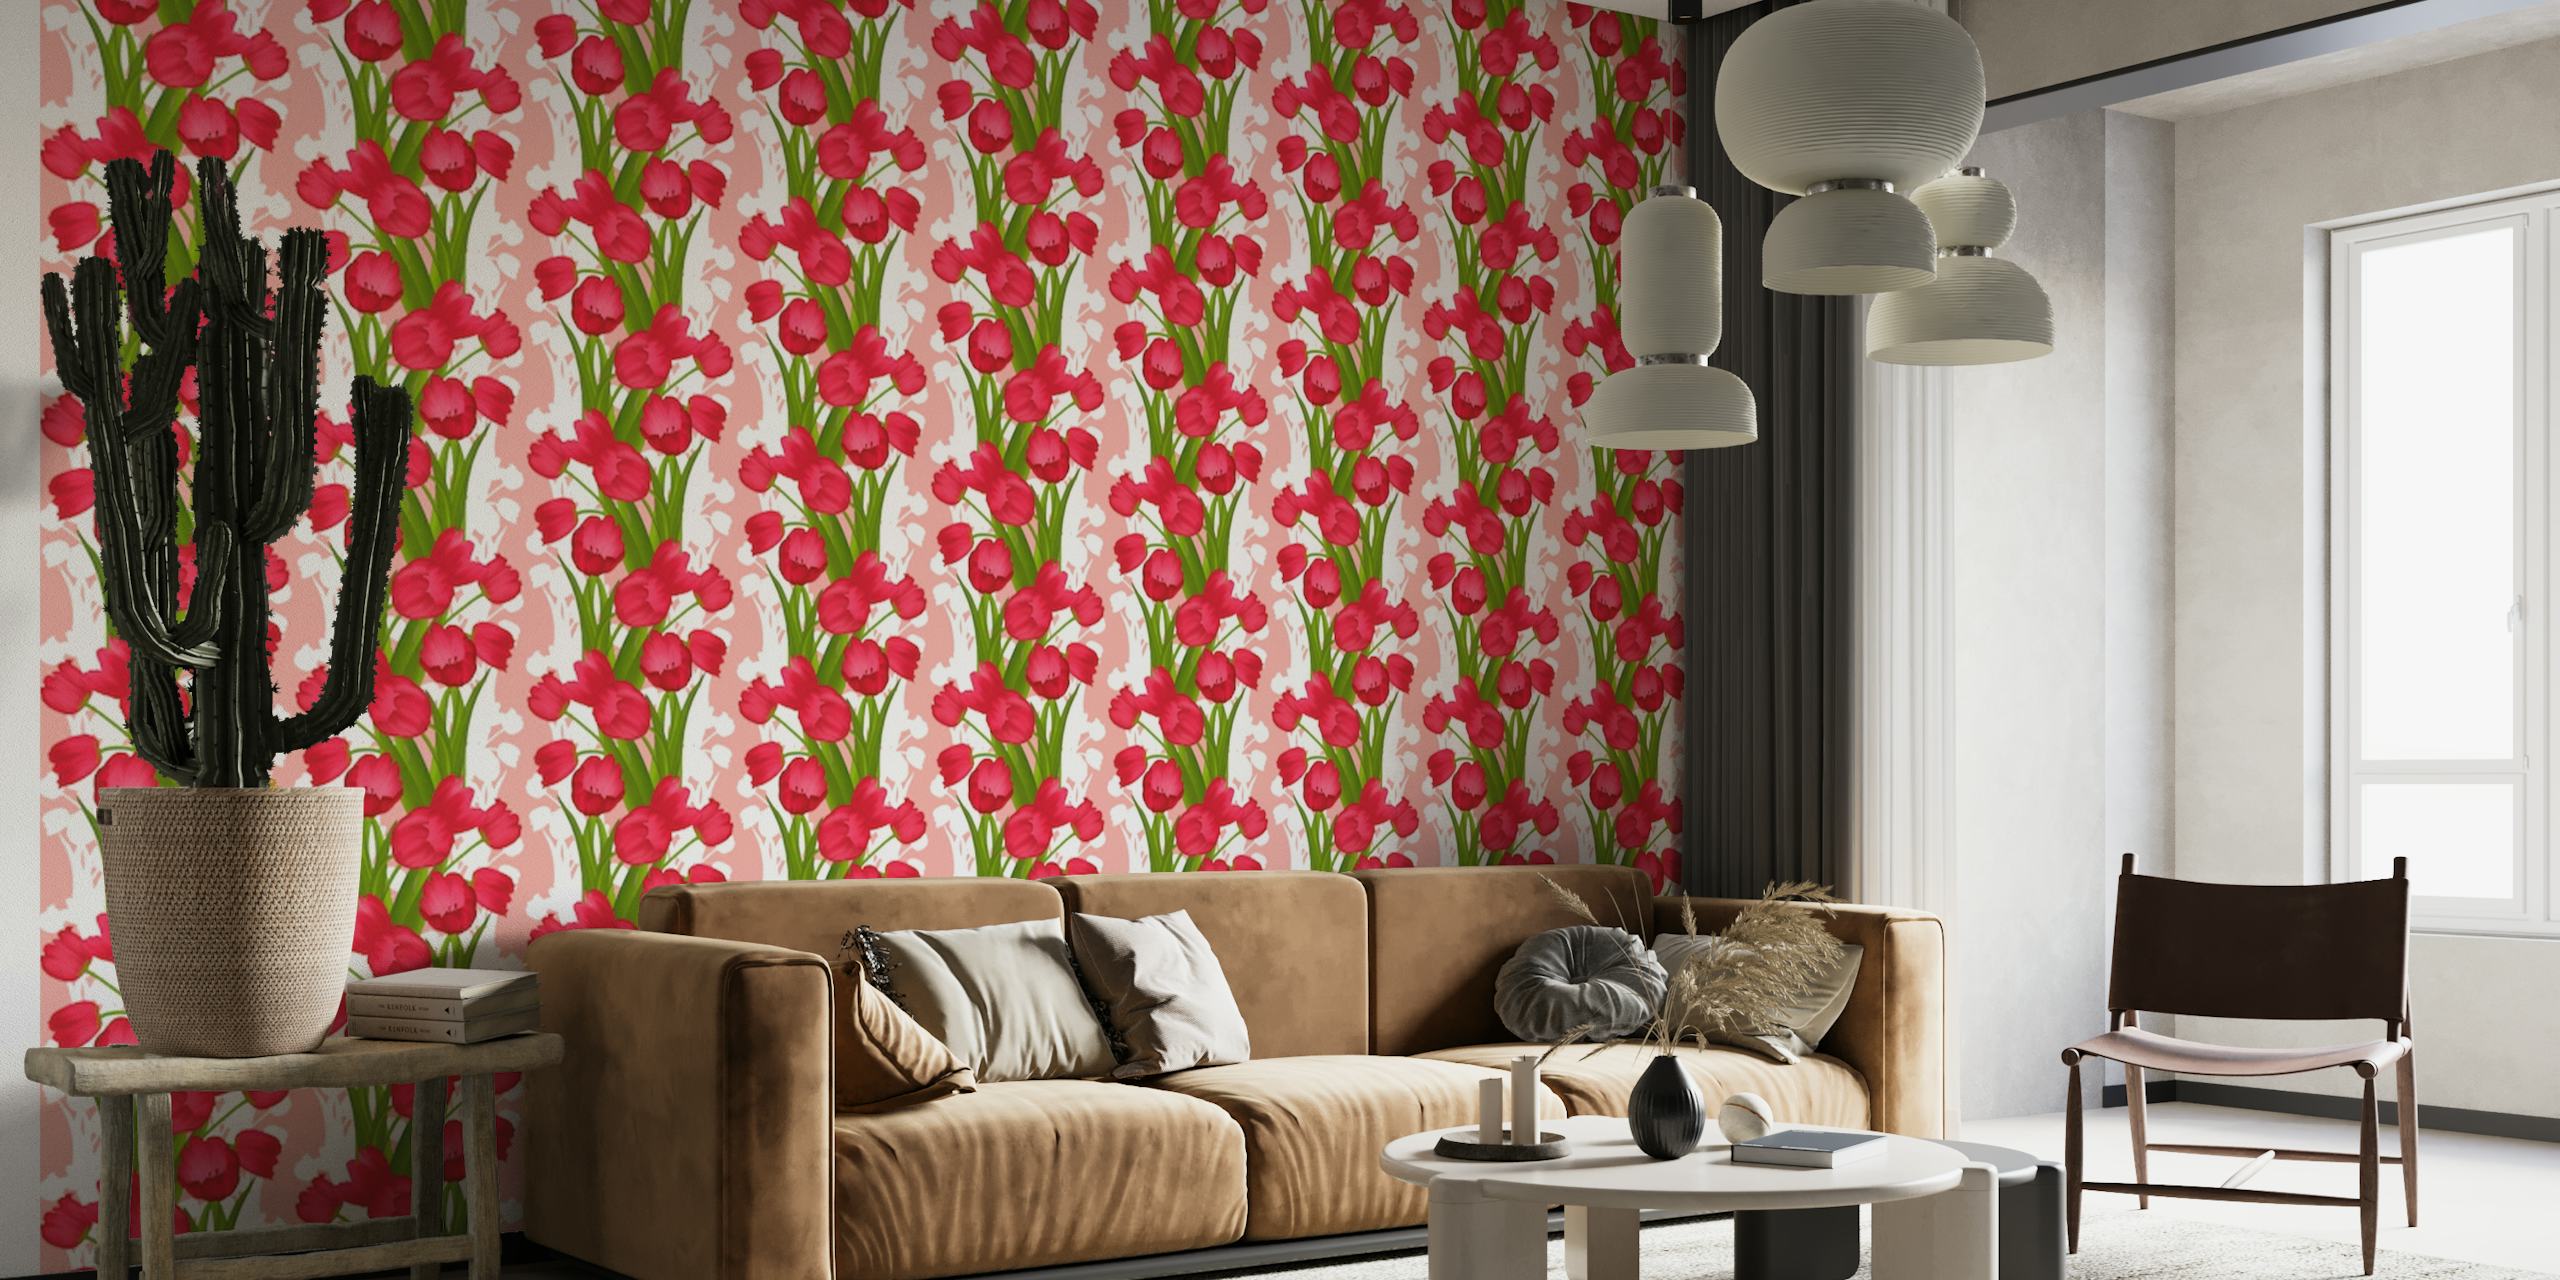 Red and white tulips with green leaves wall mural